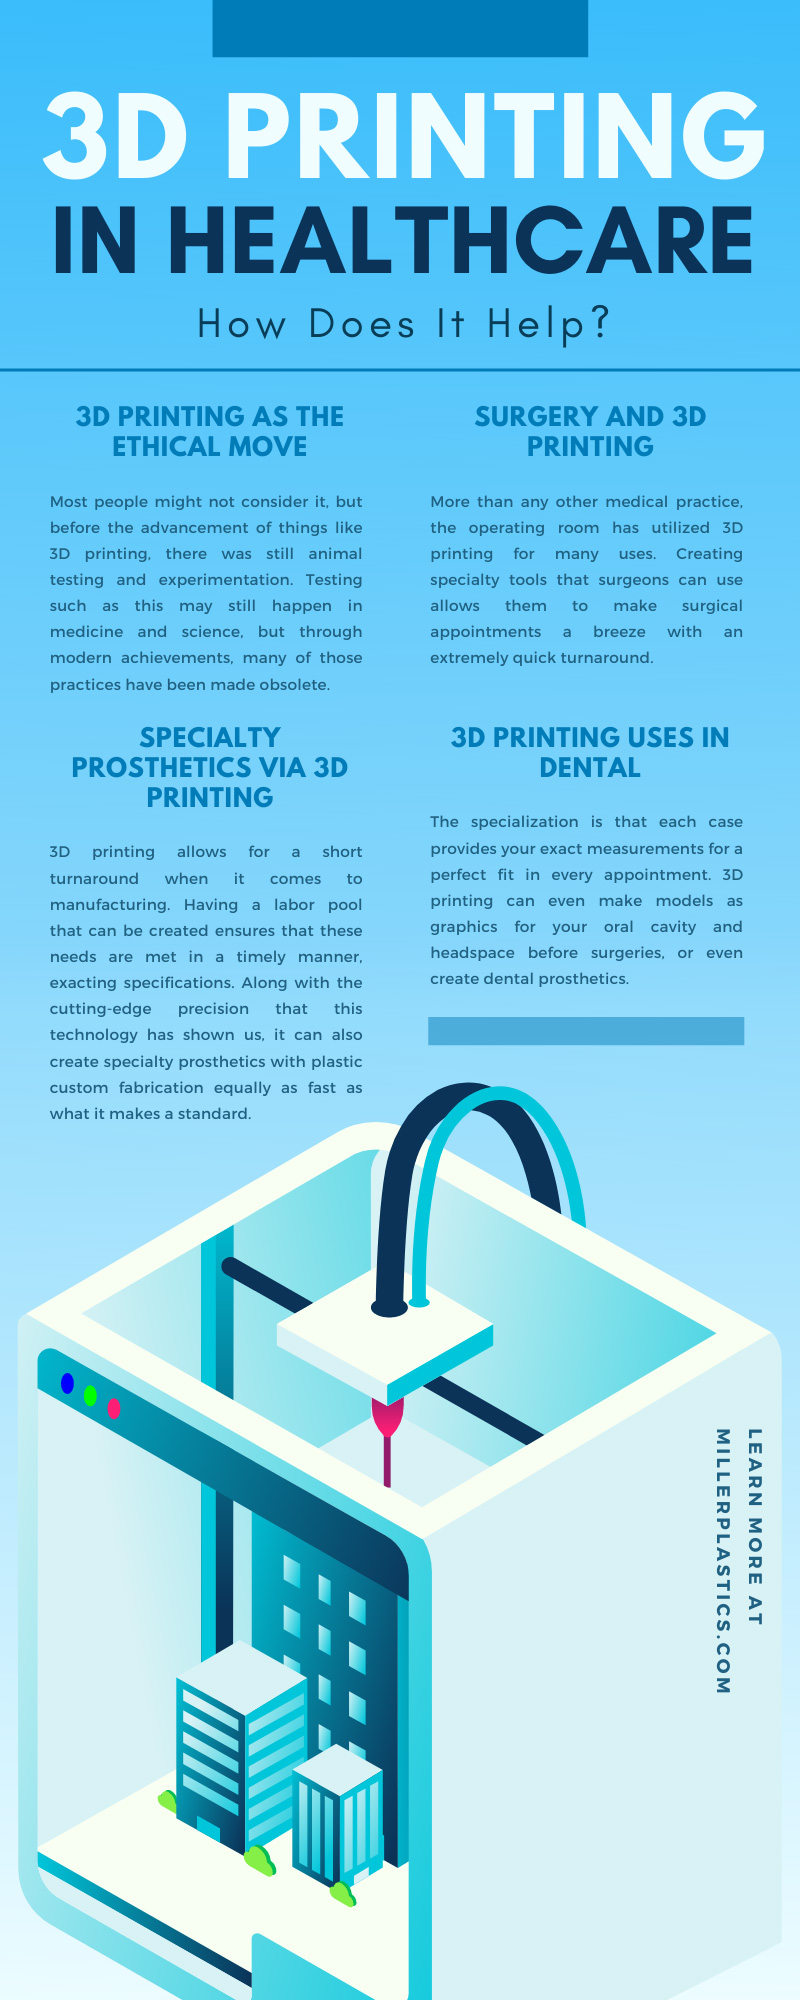 3D Printing in Healthcare: How Does It Help?